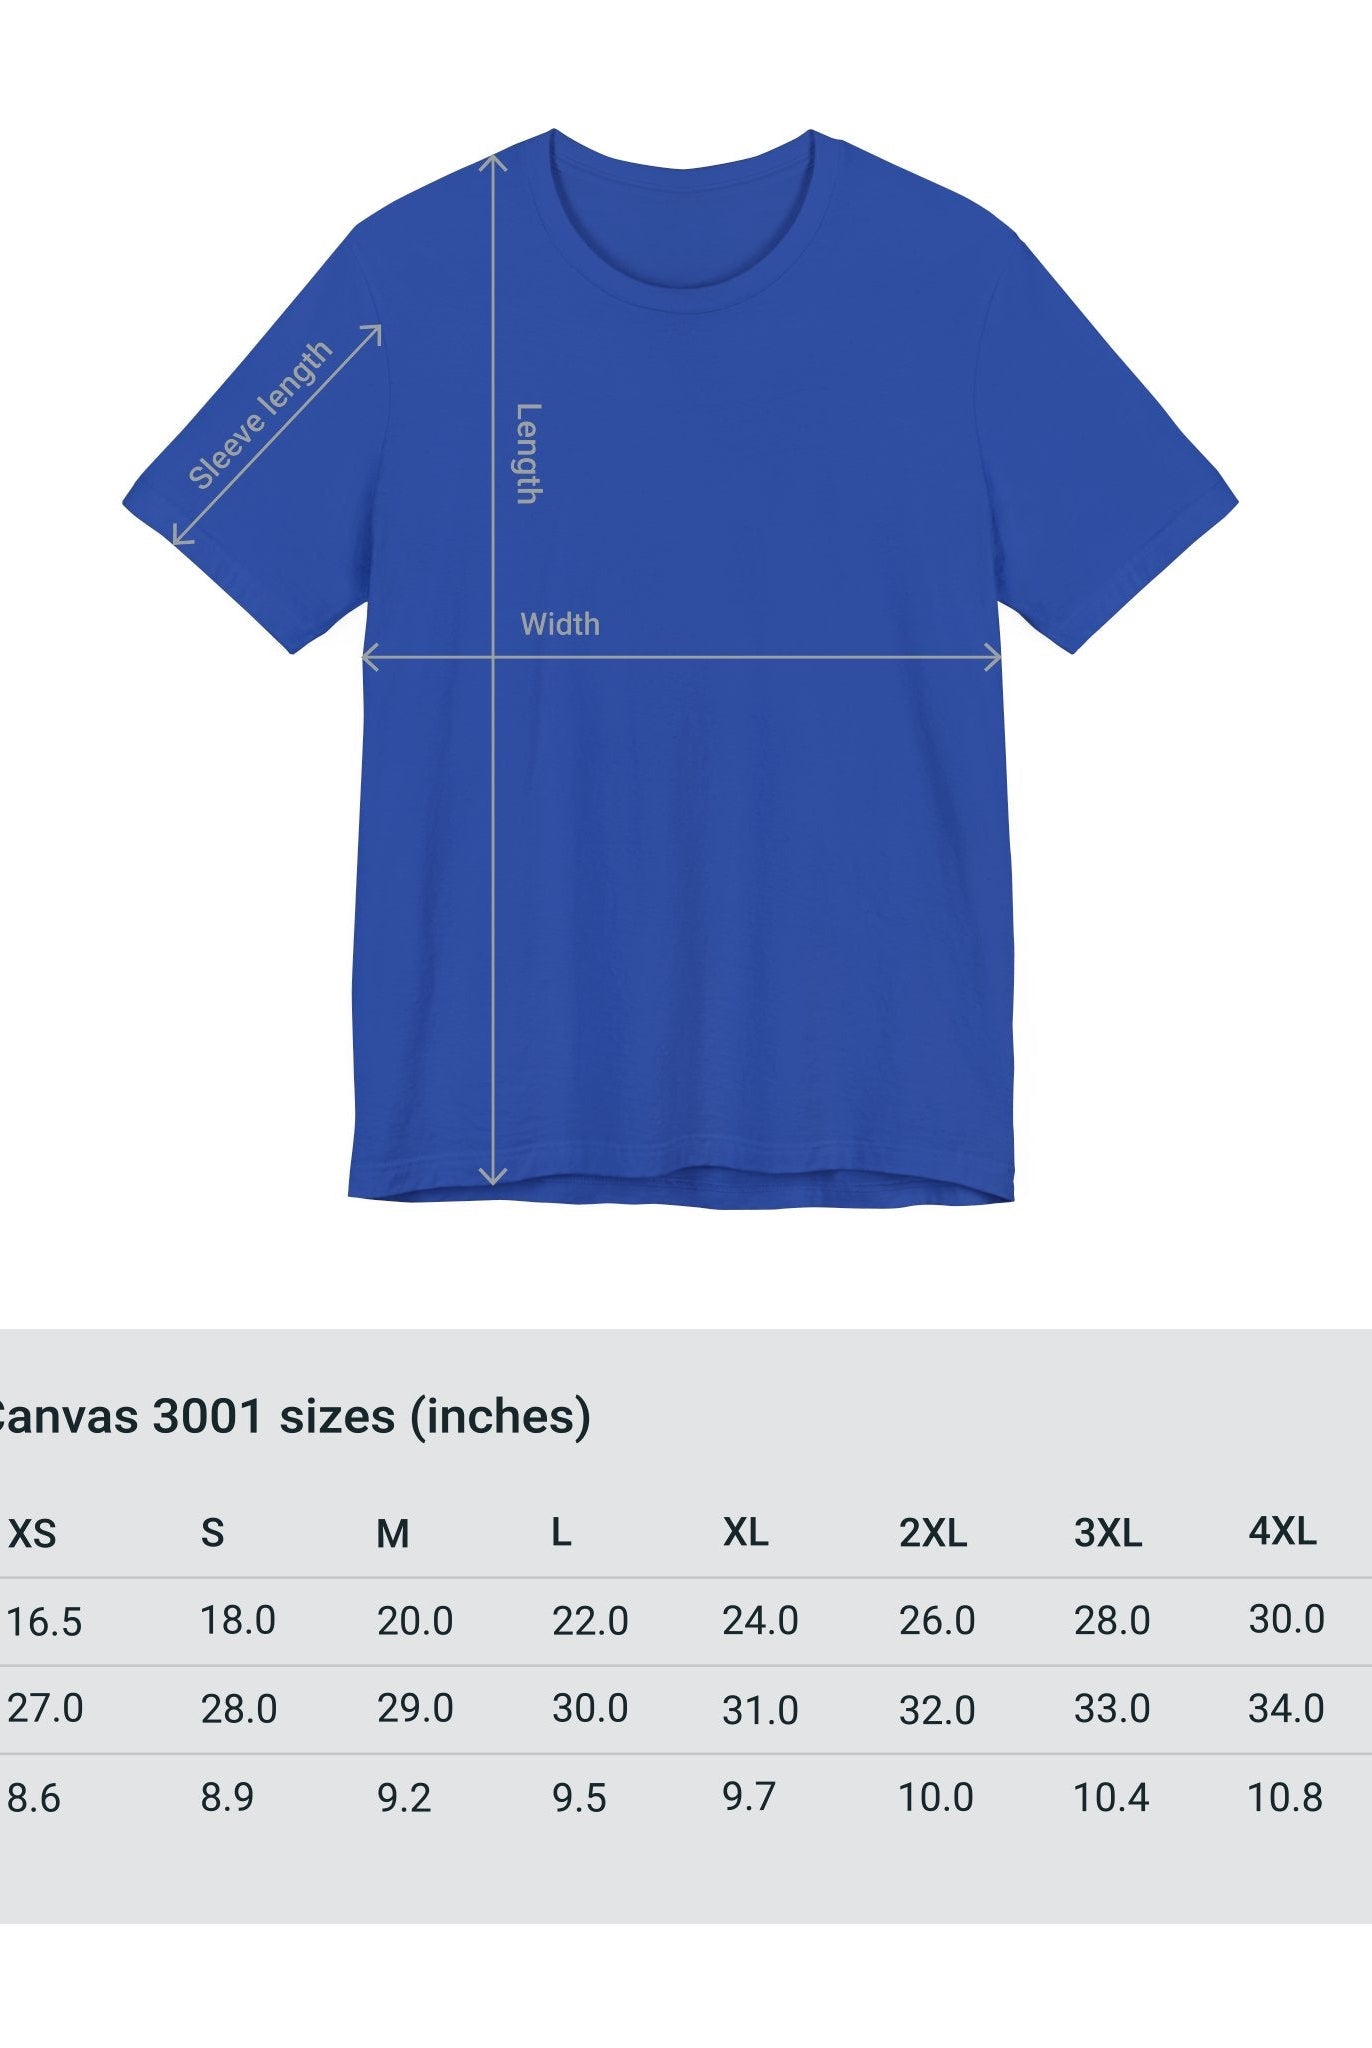 Adventure Unlimited - Surfing T-Shirt with Size Measurements - Direct-to-Garment Printed Item